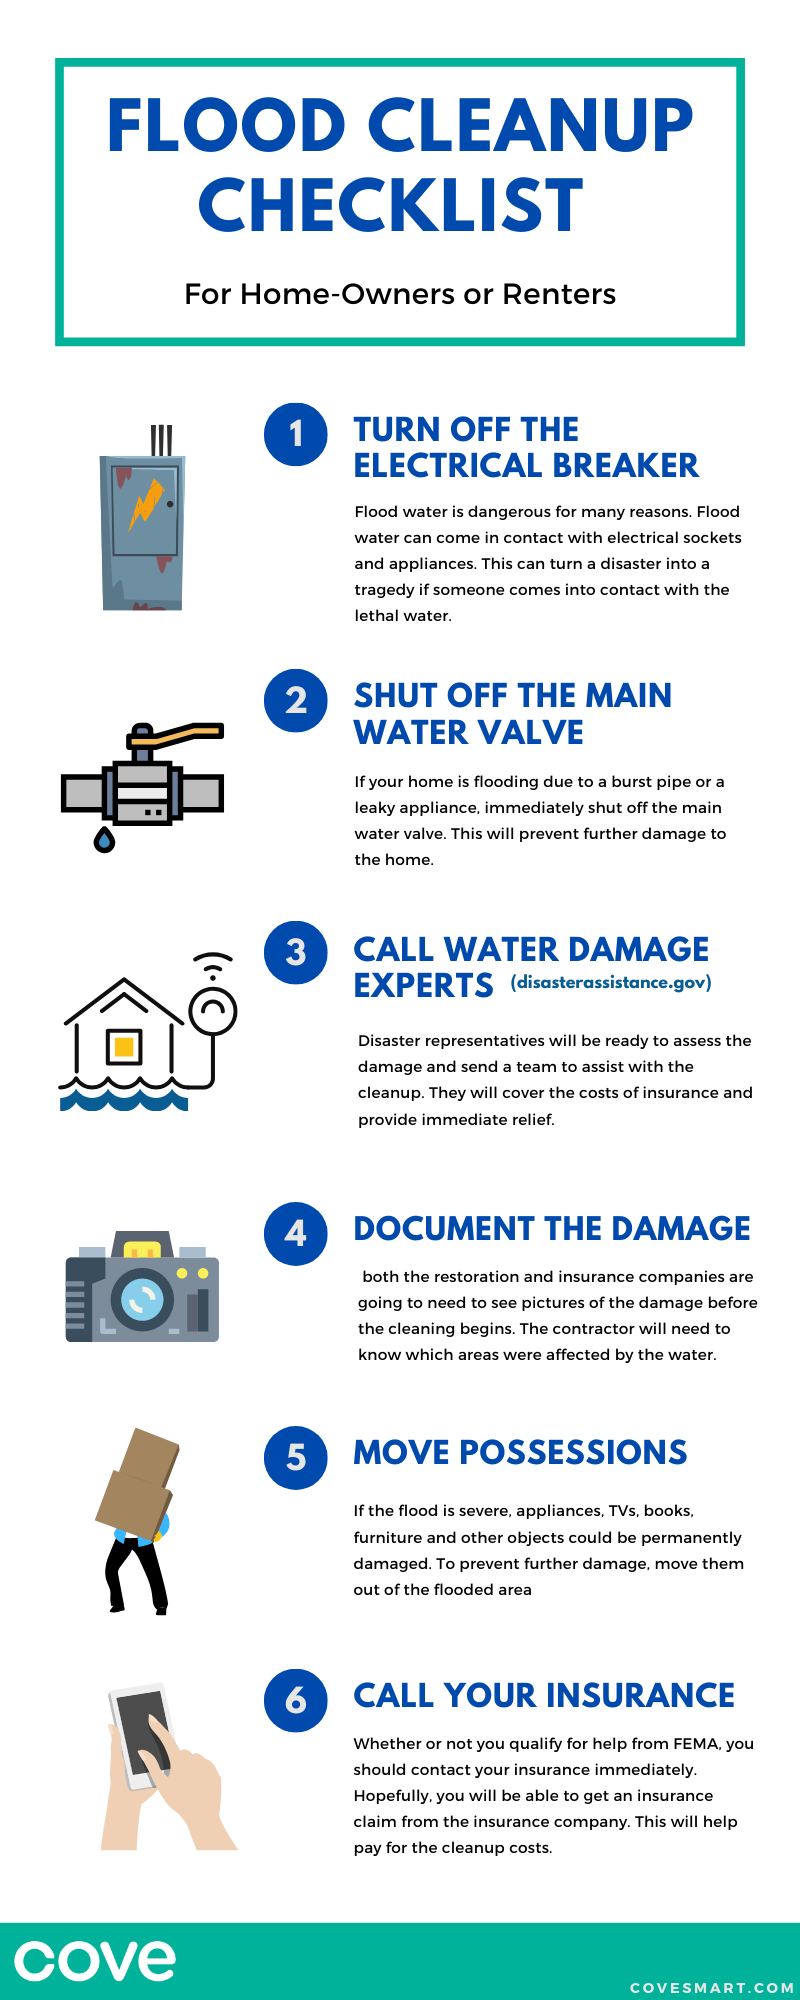 Turn off the electrical breaker, shut off the main water valve, call water damage experts, document the damage, etc.